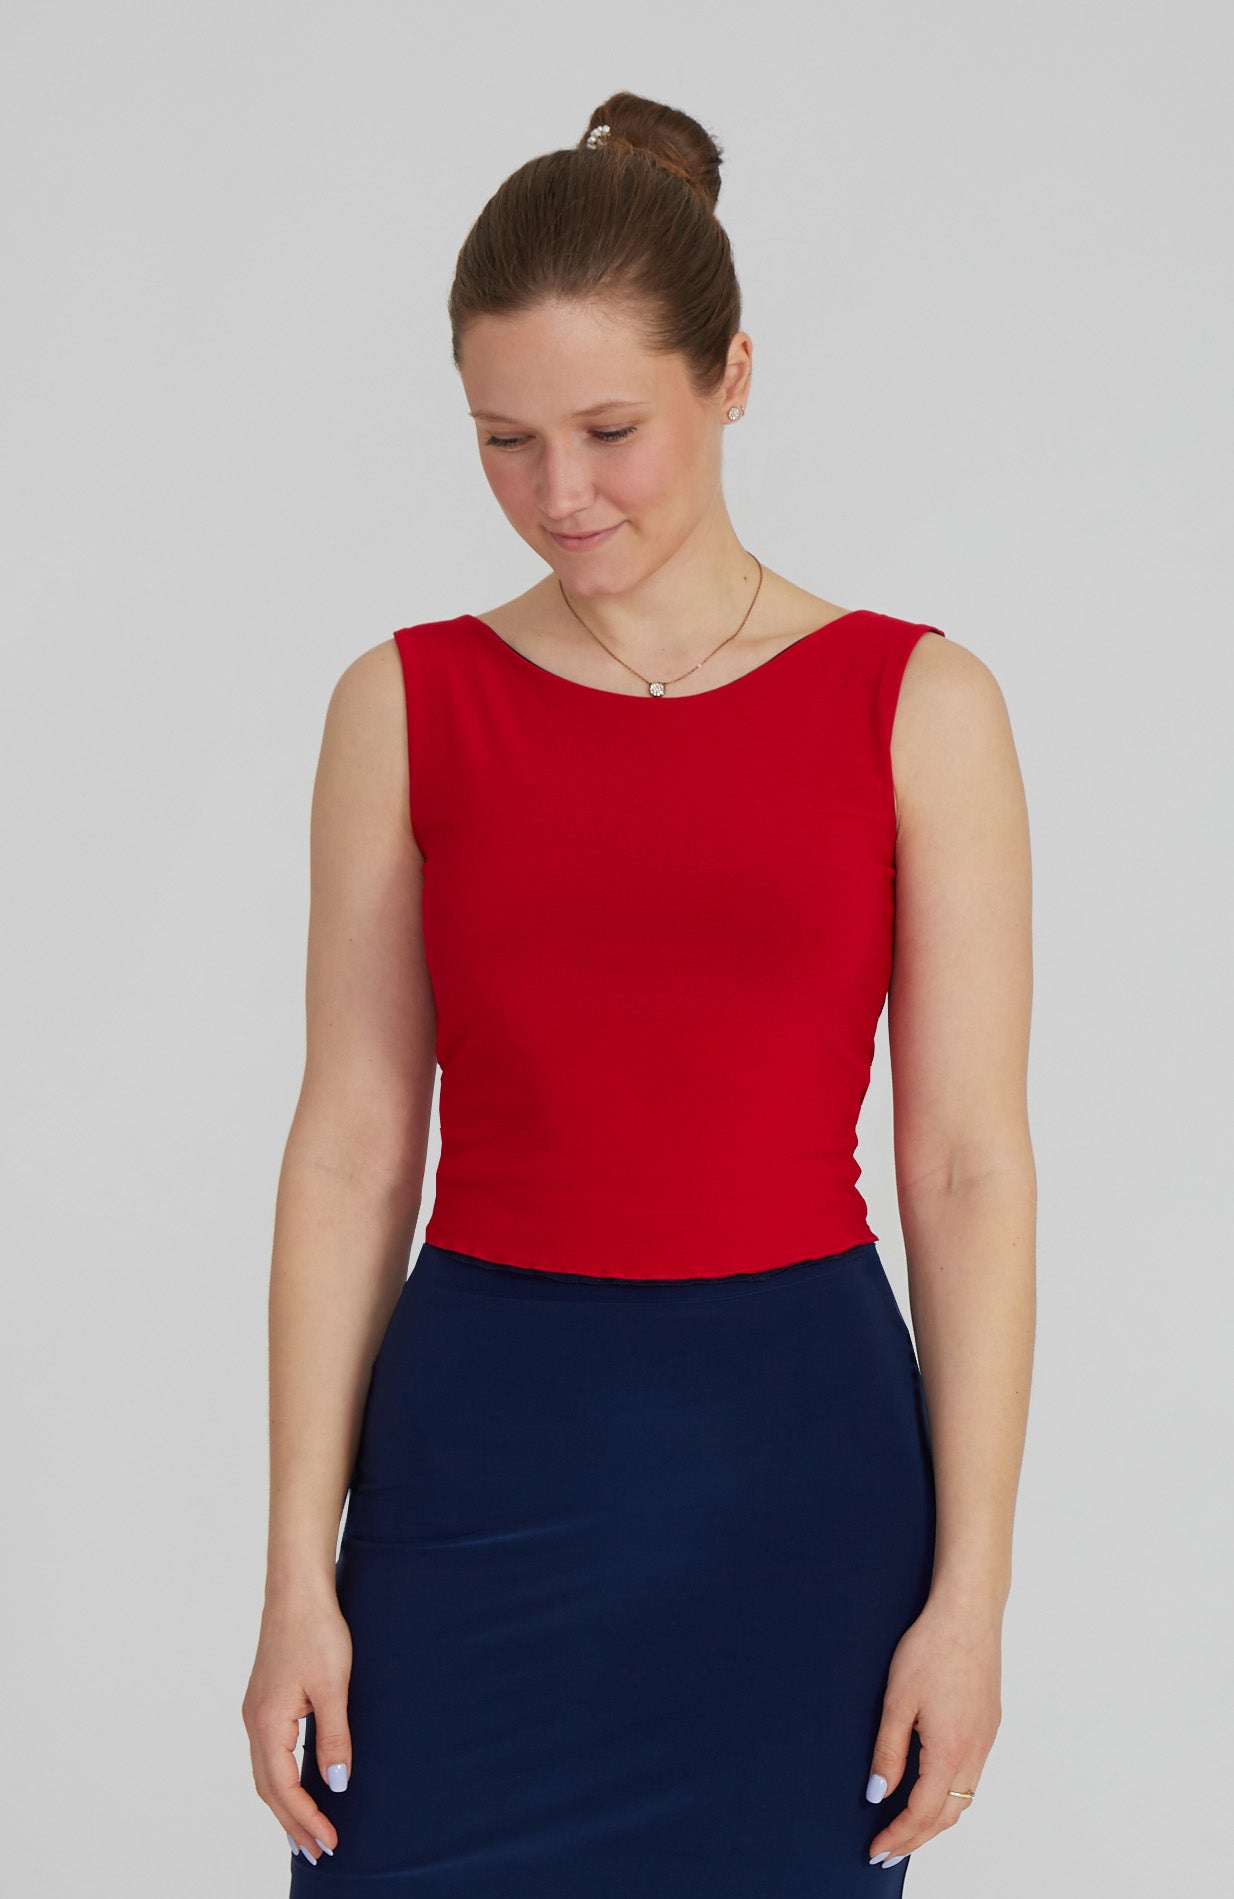 DORA - Reversible Draped Top in Classic Red / Navy Blue